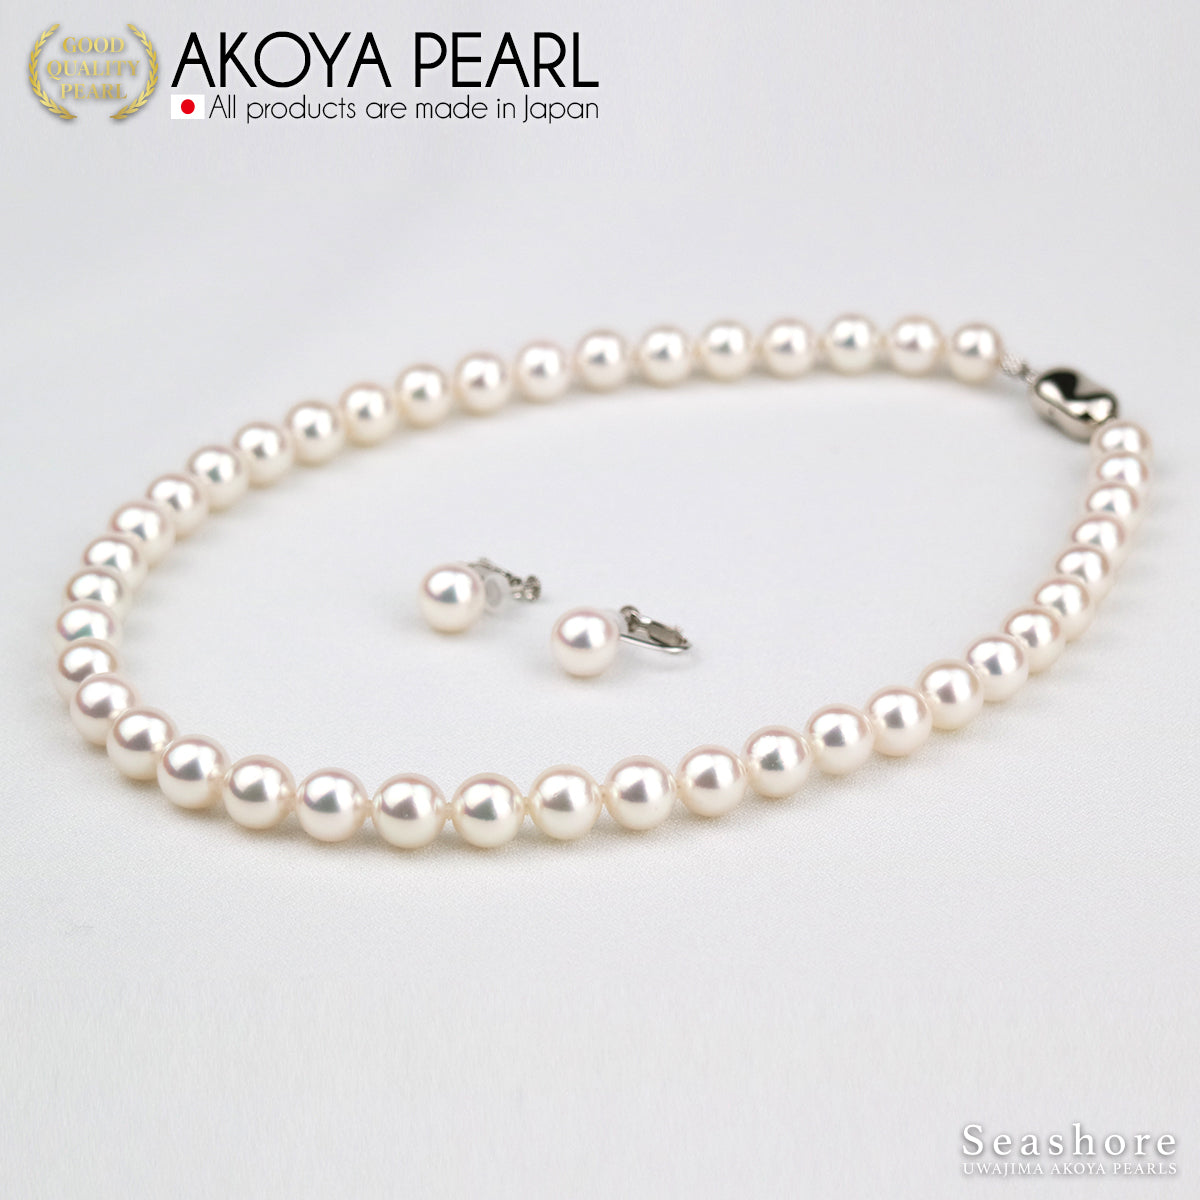 [Specially Selected Material: Florence Pearl] Akoya Pearl Formal Necklace Set of 2 [8.5-9.0mm] Earrings/Earrings White Roll Thickness 0.5mm or More Certificate of Authenticity Storage Case Included